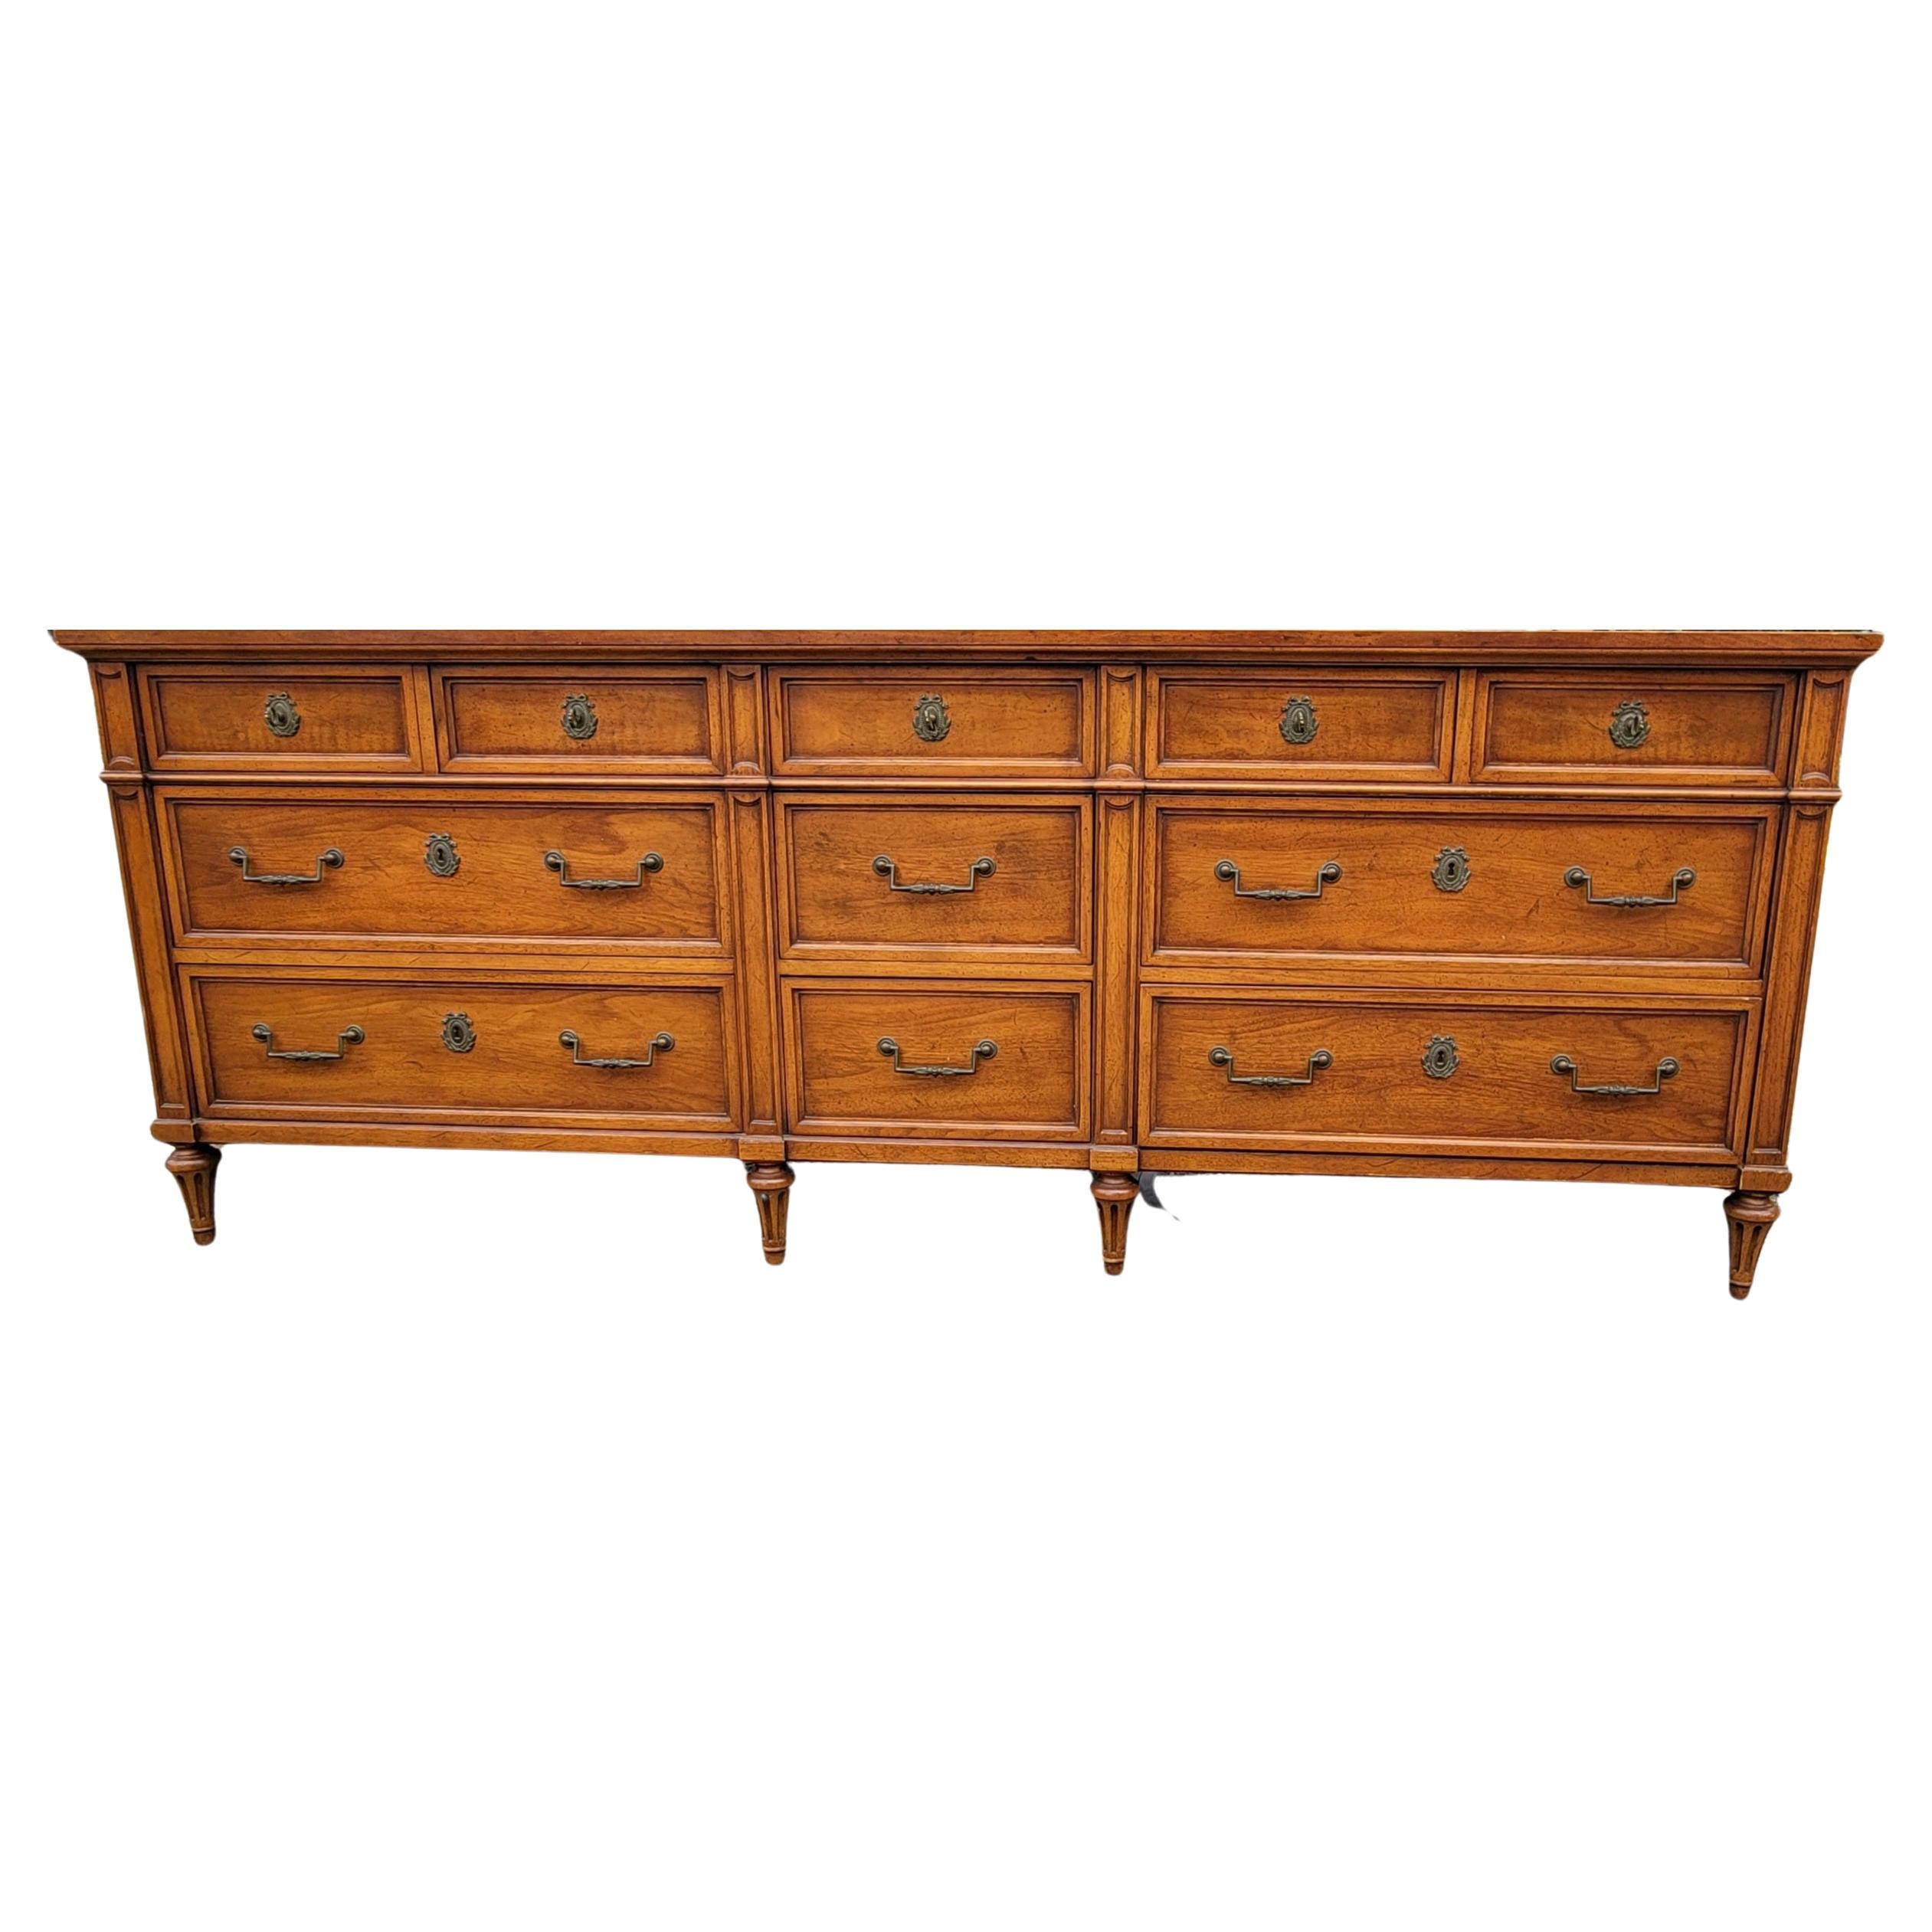 Rare Henredon Custom Folio One Fruitwood drawers 11 drawers triple dresser in very good vintage condition. Features 5 smaller top drawers, 4 large bottom drawers with 2 medium center drawers.
Measures 84